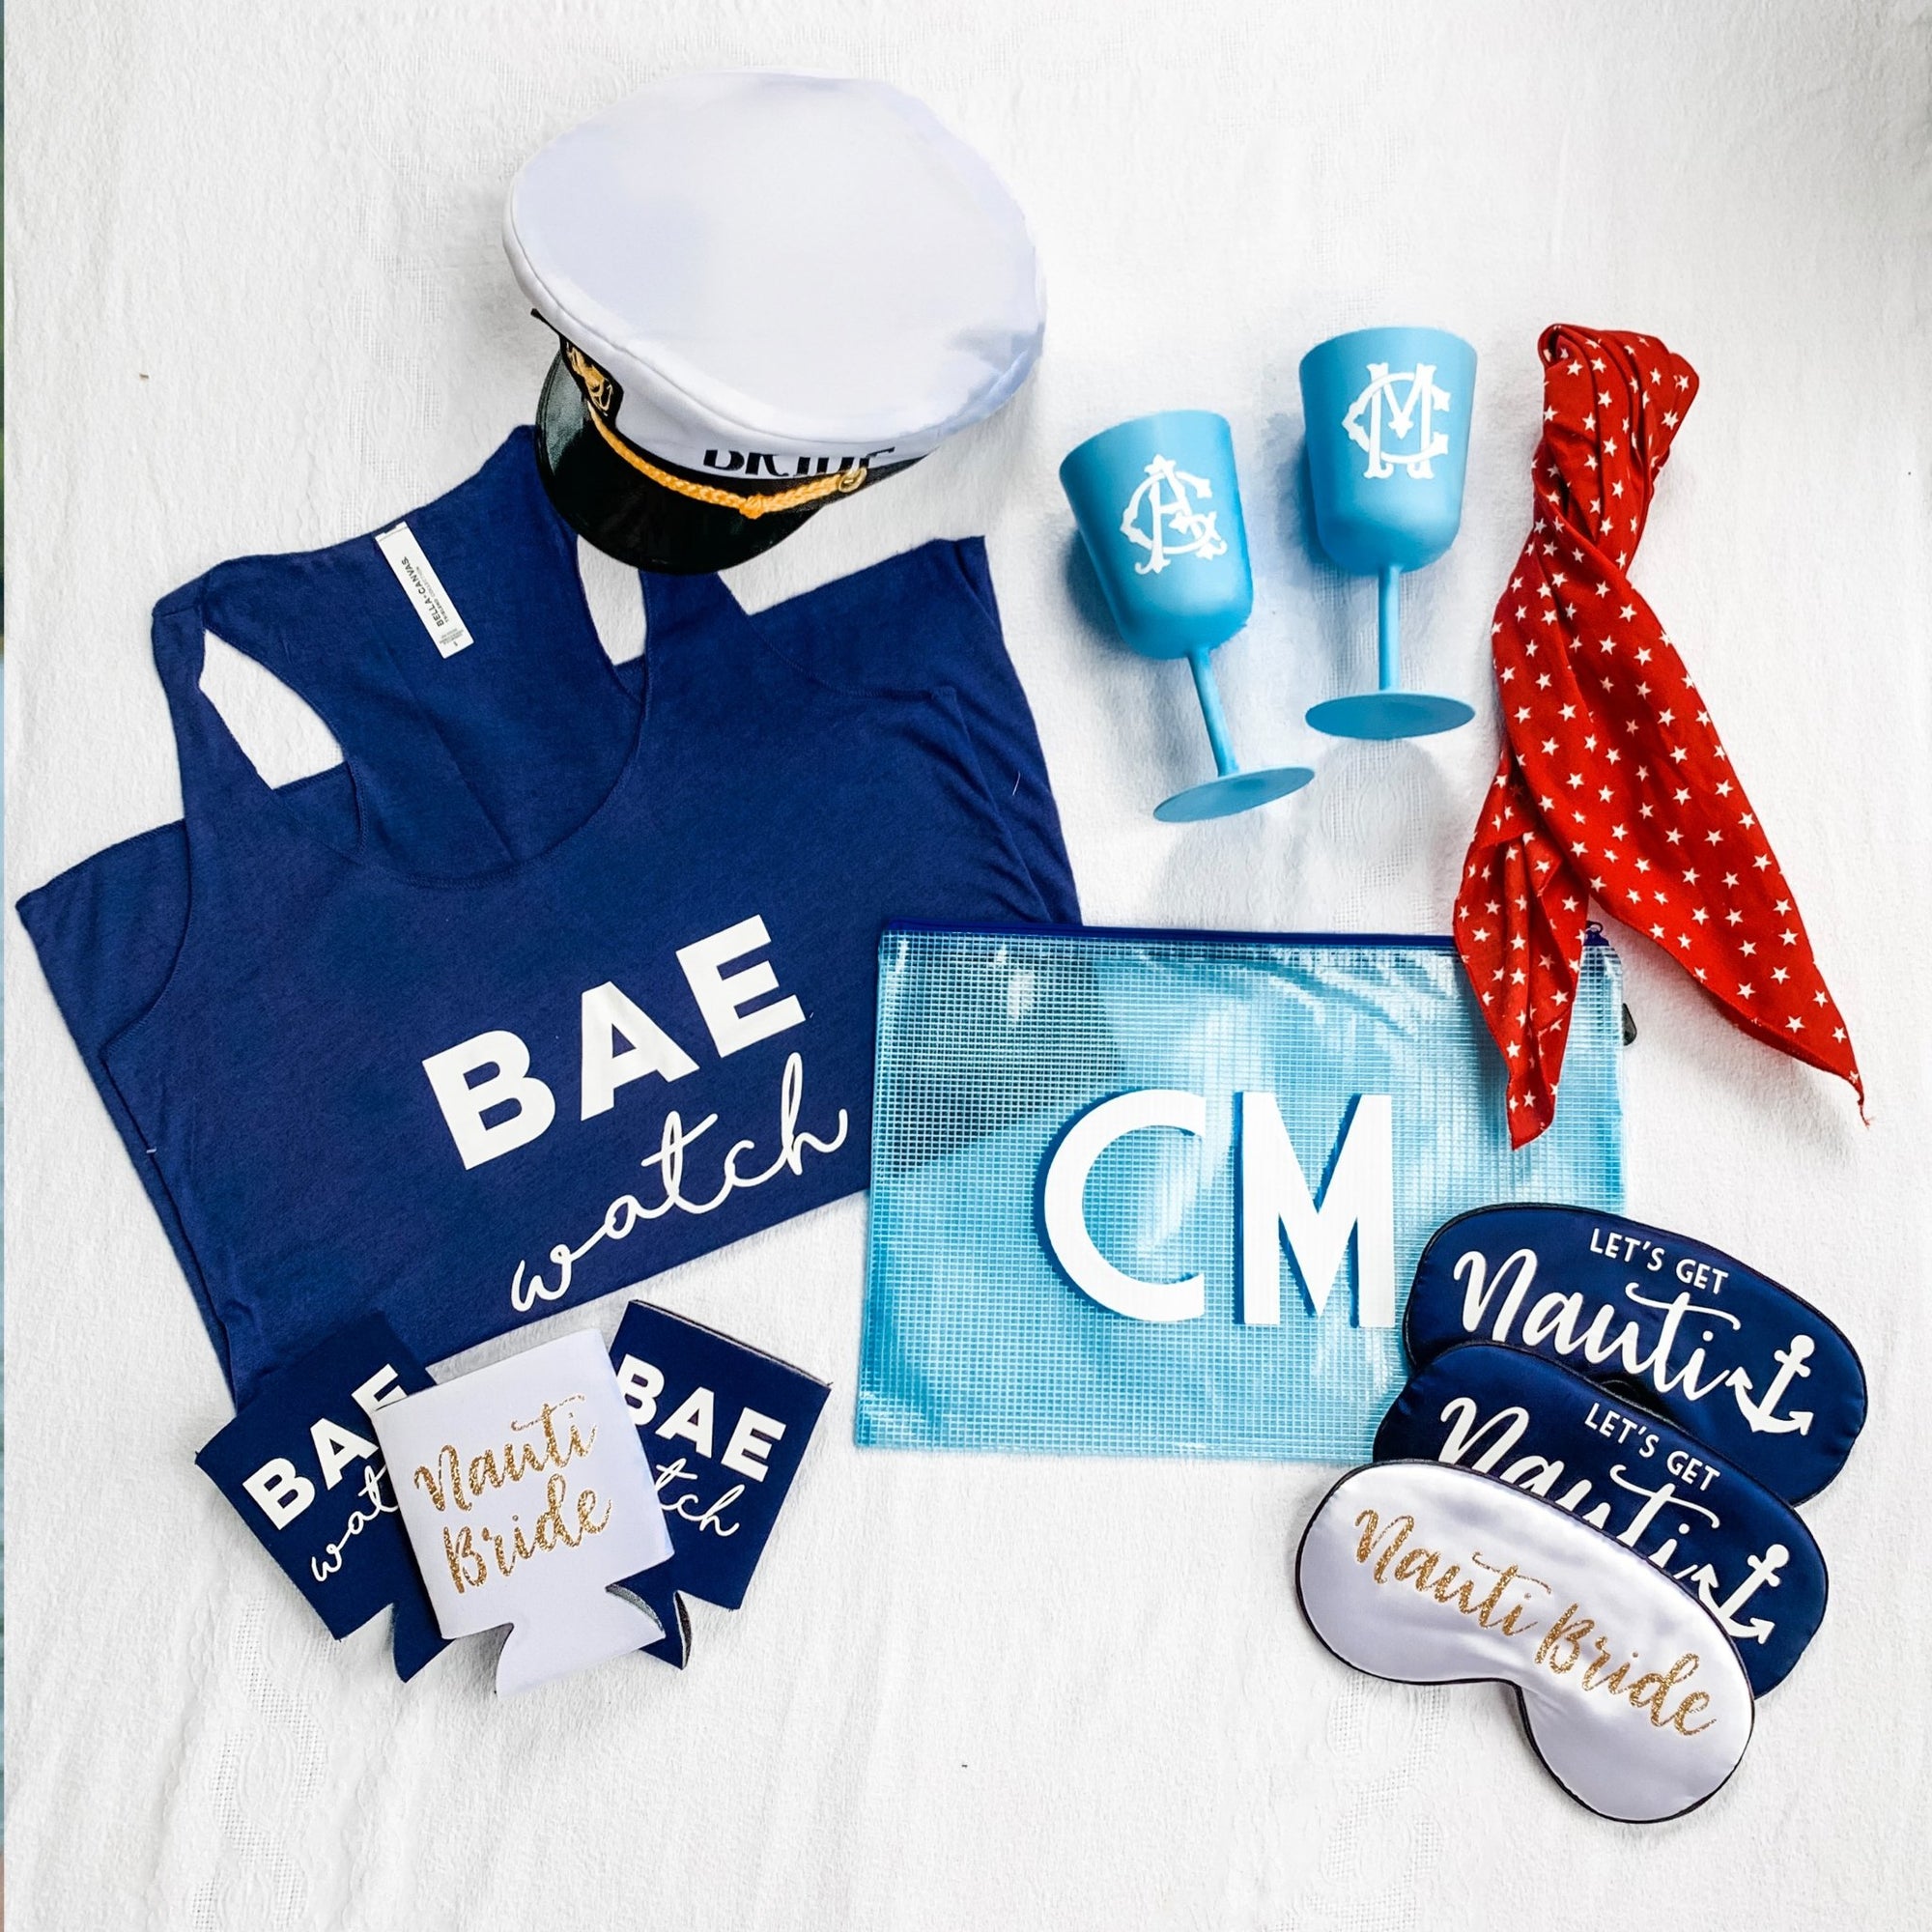 A white sleep mask that reads "Nauti Bride" in gold is paired with two navy sleep masks which read "Let's Get Nauti" in white writting.